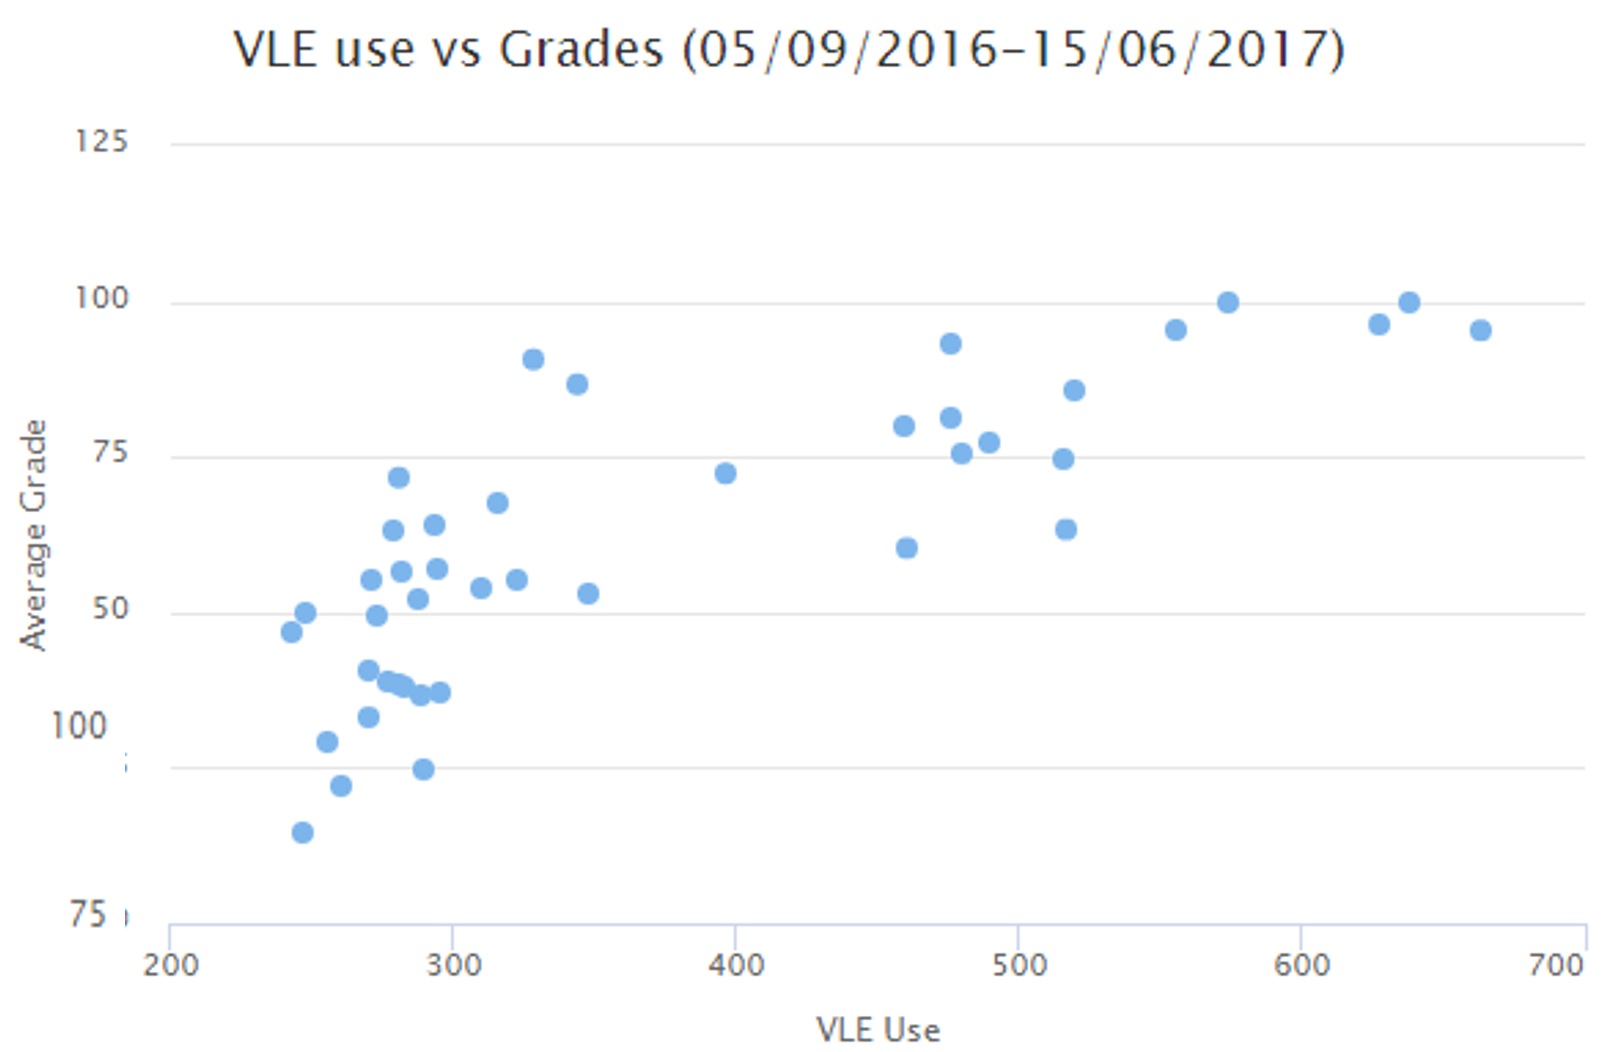 Graph shows a reasonable correlation between VLE use and grades